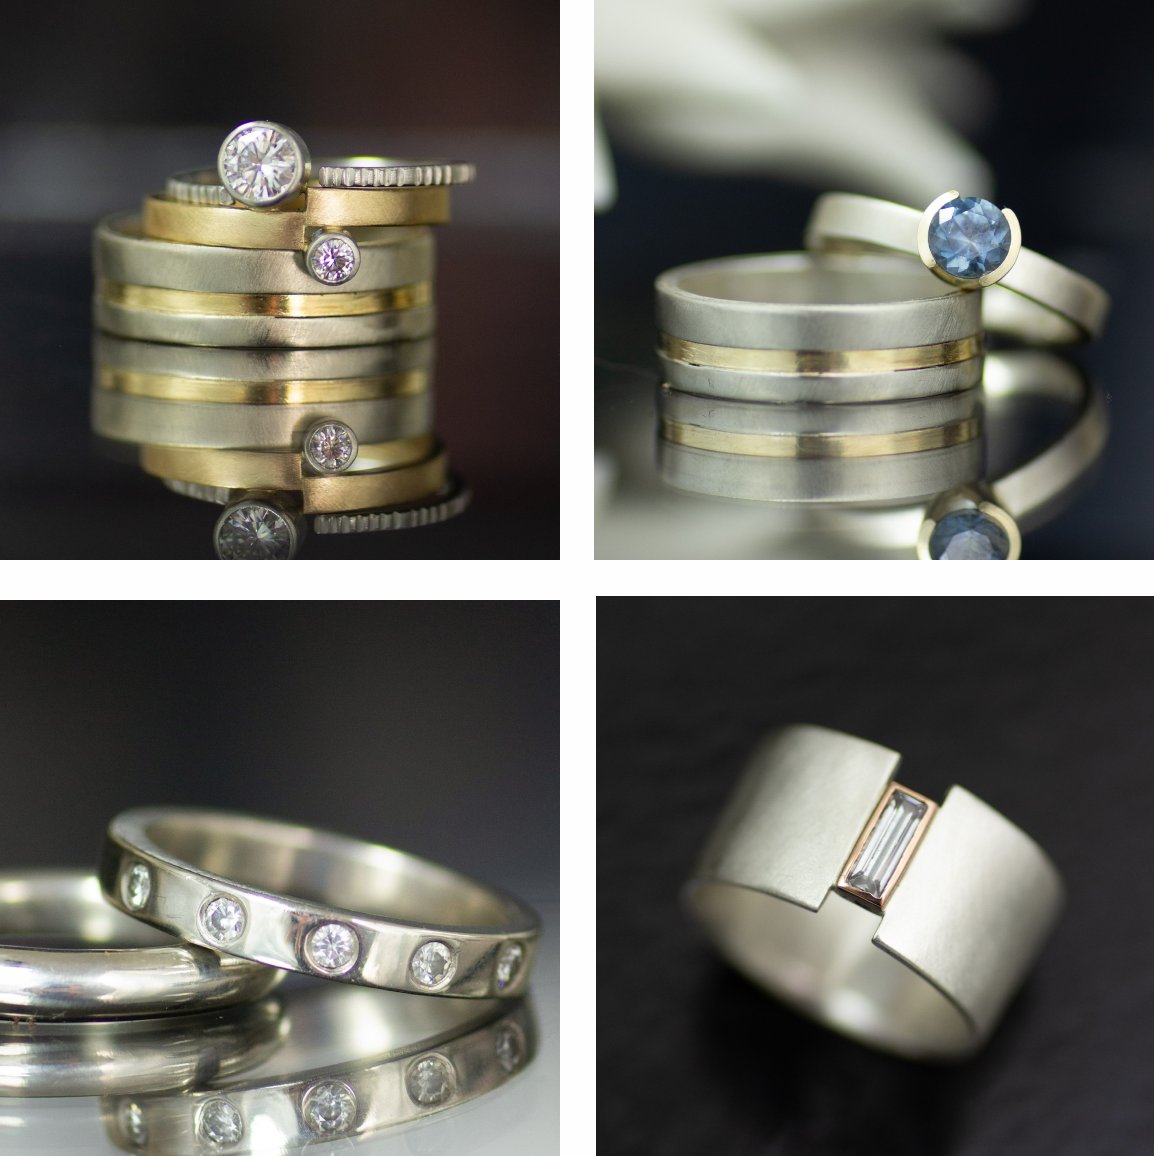 Platinum Jewelry created by LOLiDE